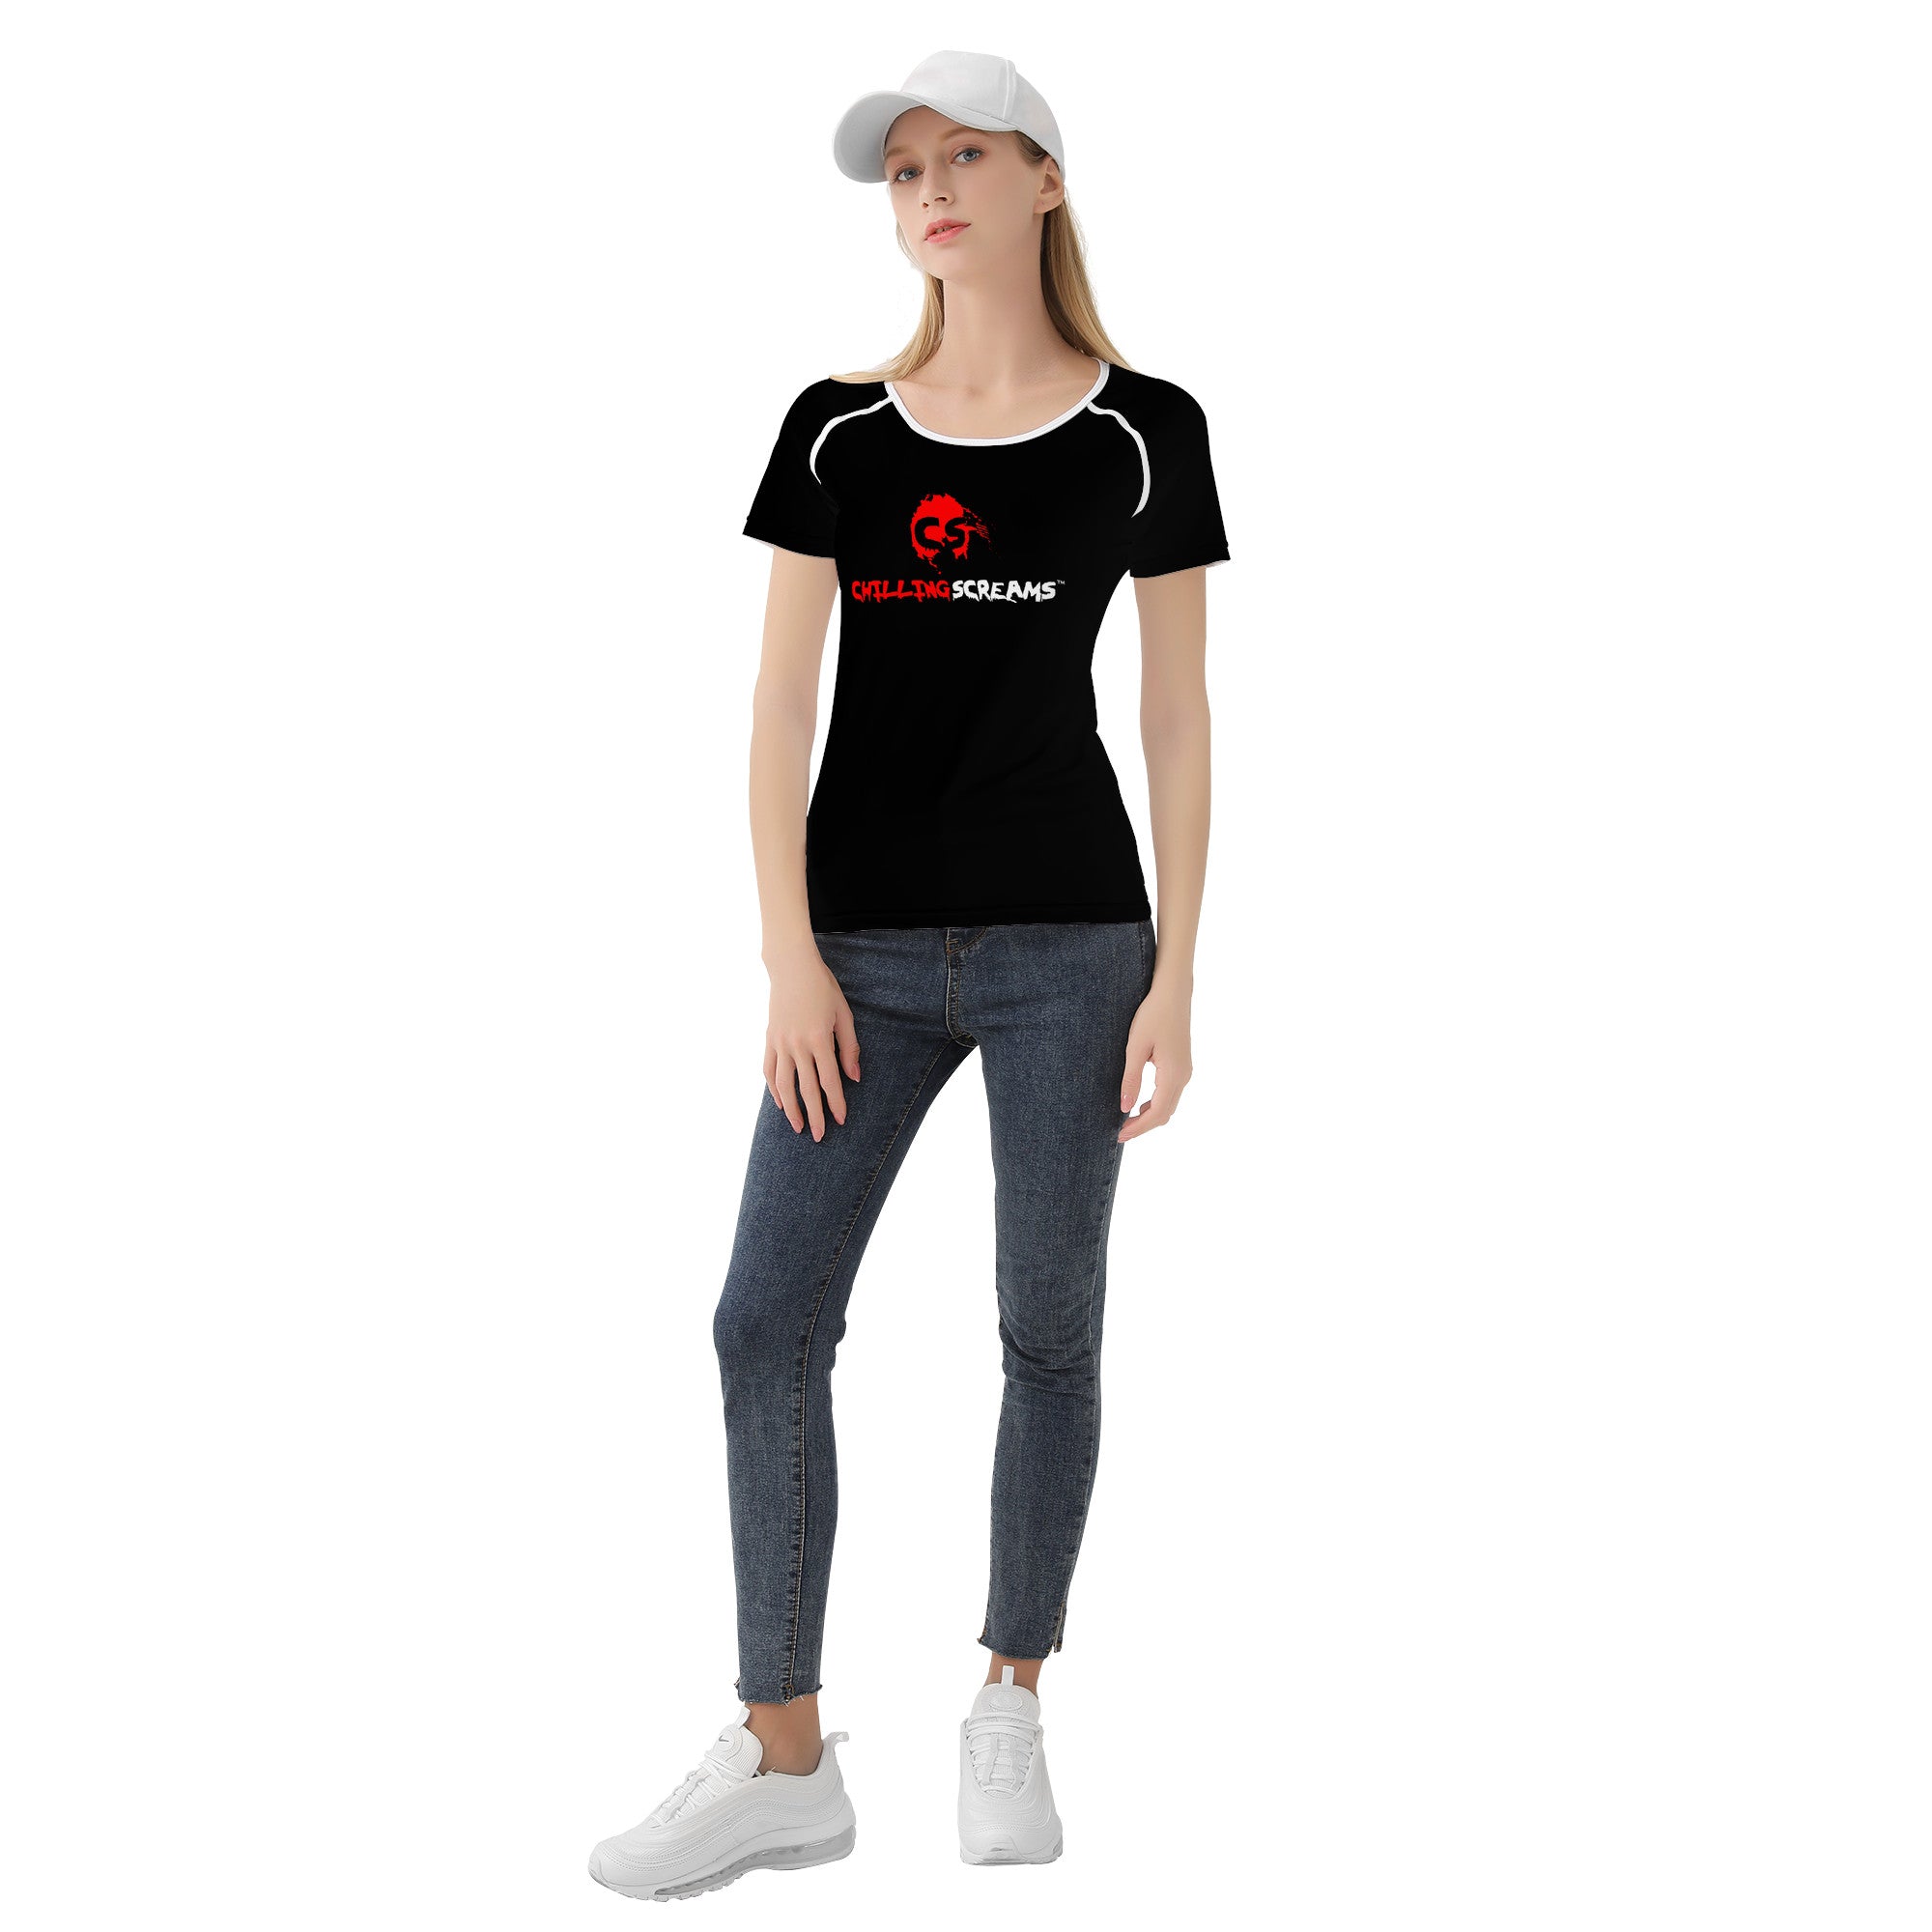 Official Womens Chilling Screams T-Shirt